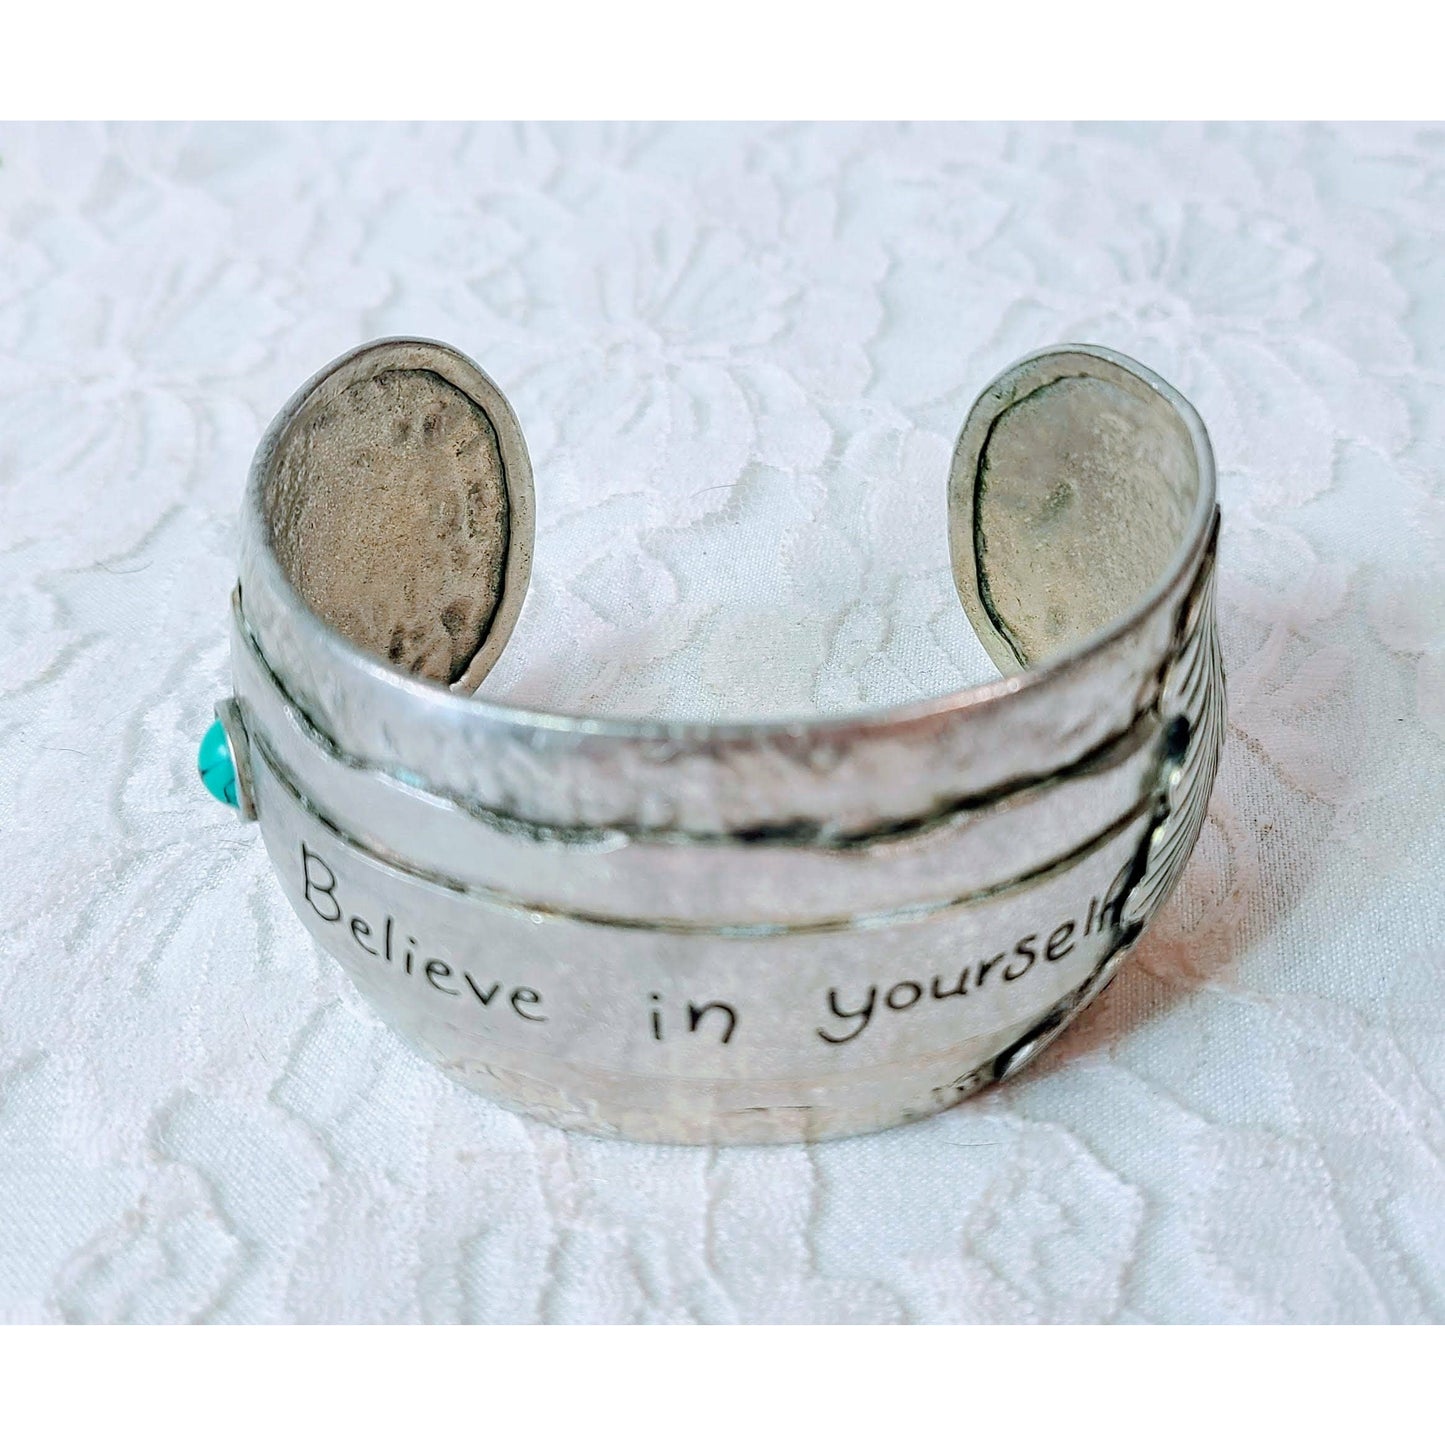 Silver Cuff Bracelet ~ Believe in Yourself ~ Affirmation Bracelet ~ Turquoise Stone & Etched Feather Accents ~ Layered Metals 1.5" Wide OOAK